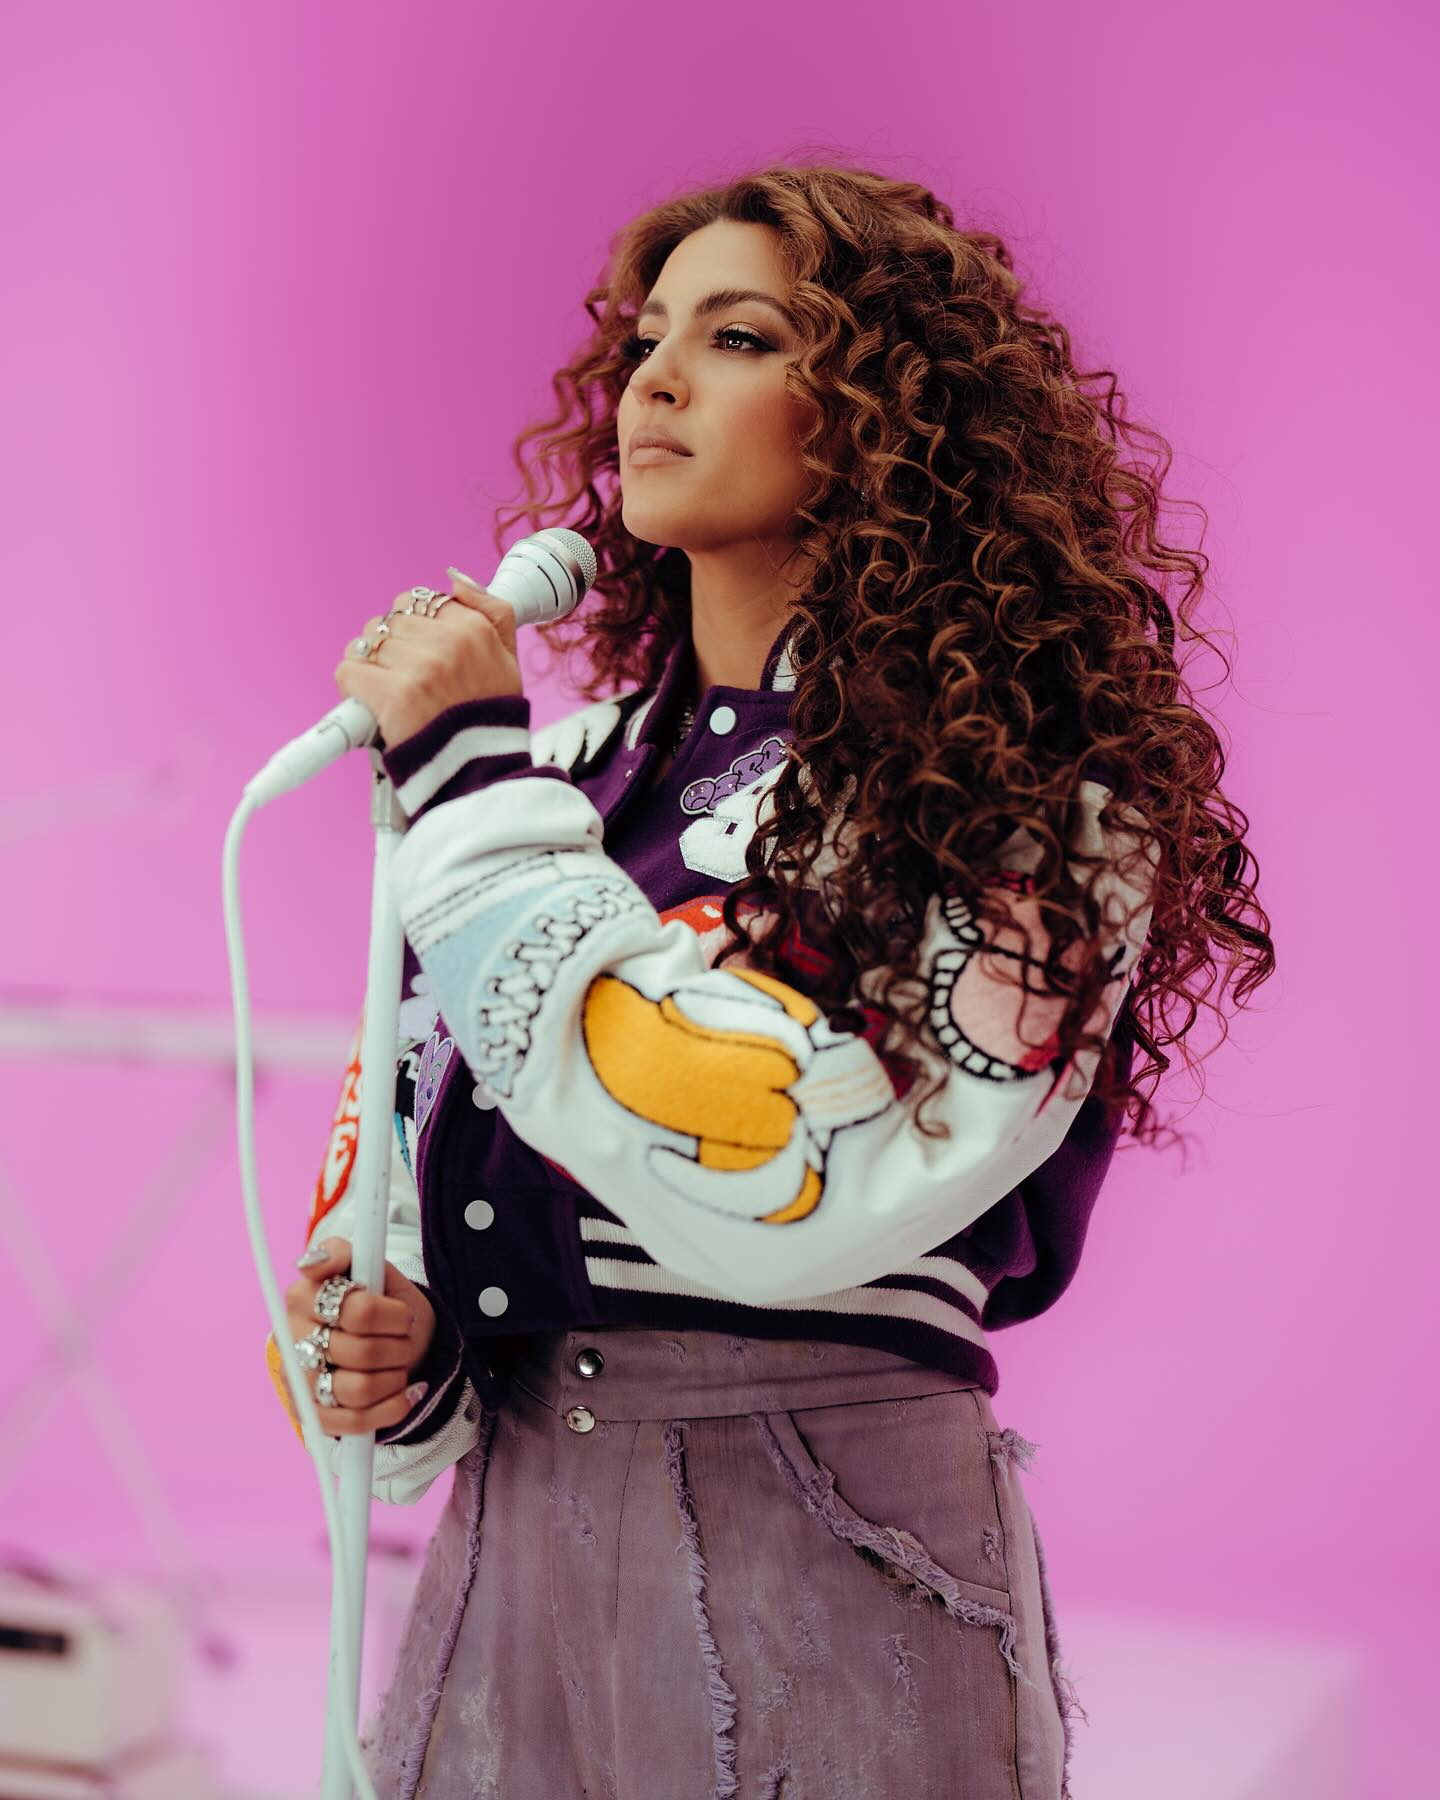 concerts in singapore - Tori Kelly